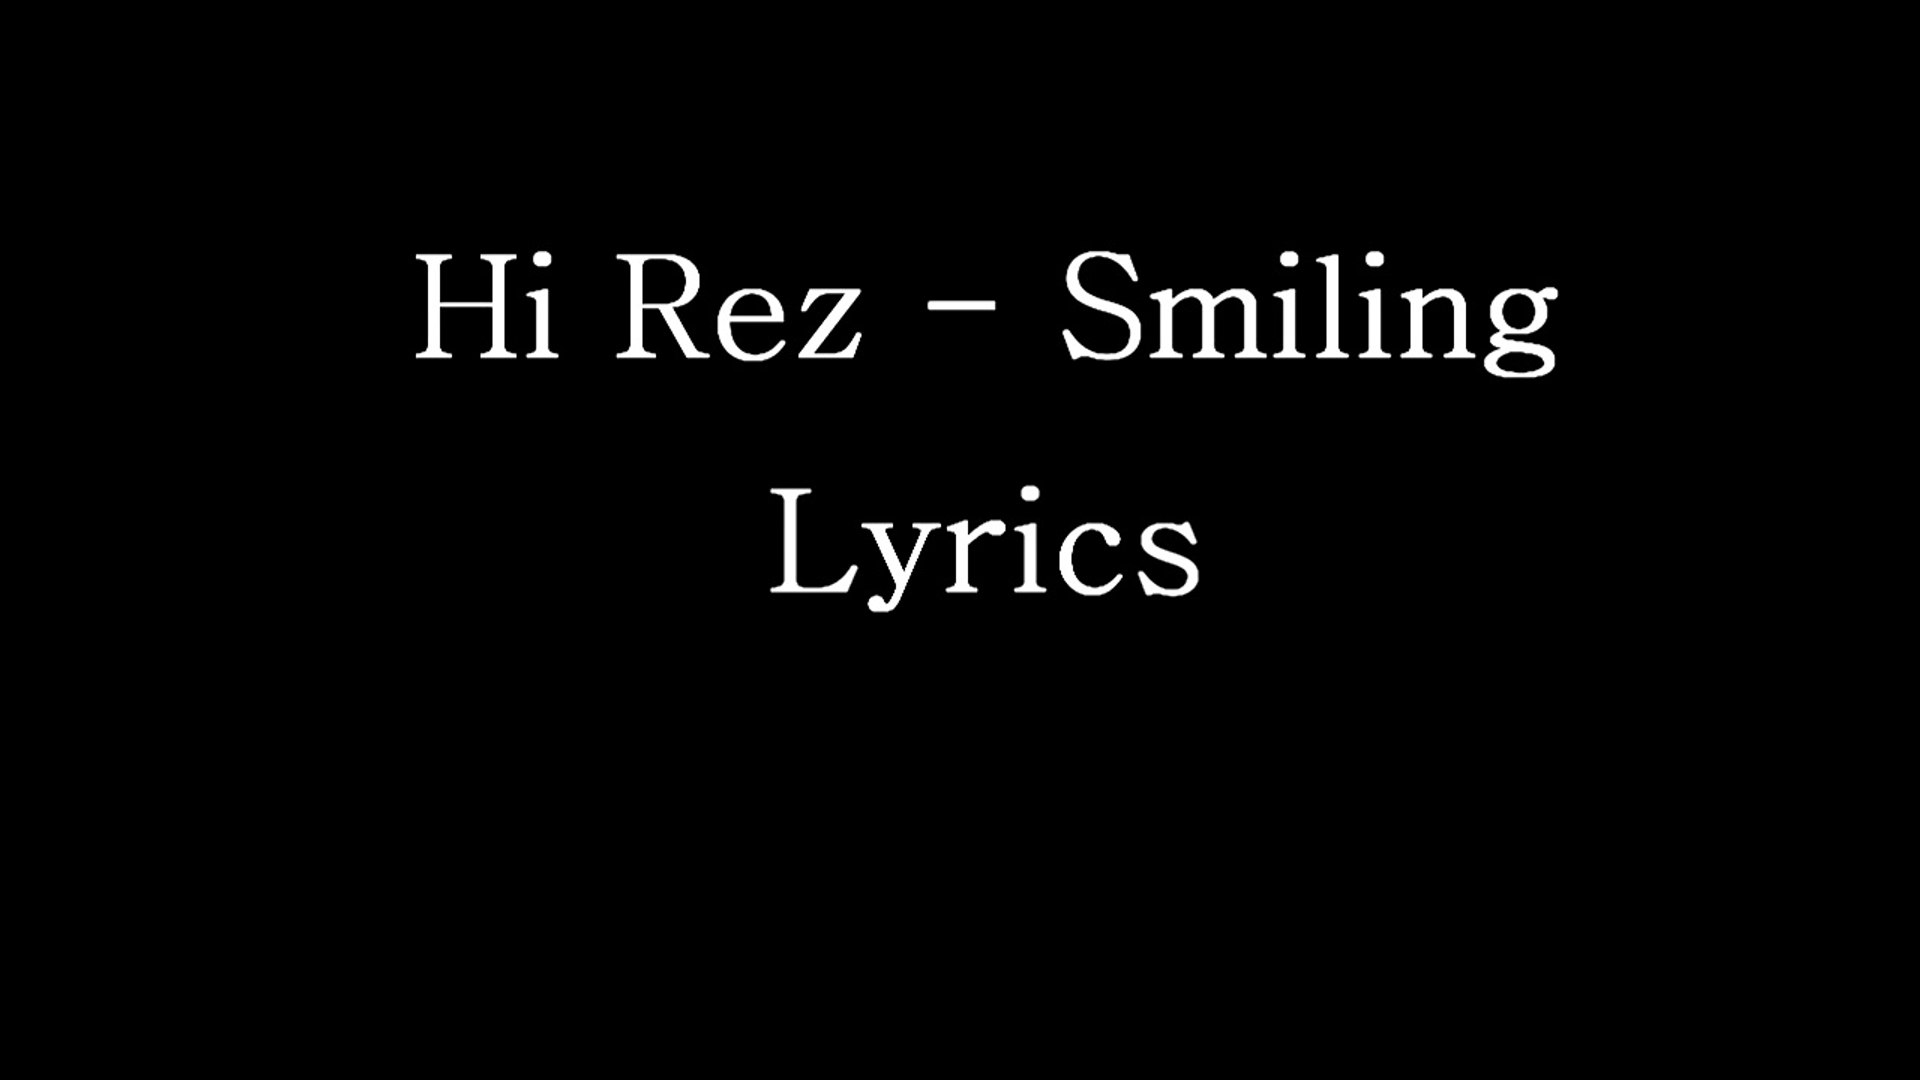 Hi Rez Smiling Lyrics Video Dailymotion The clouds are never grey if only there was a place if you could just see my face then yall would see i'm smiling. dailymotion